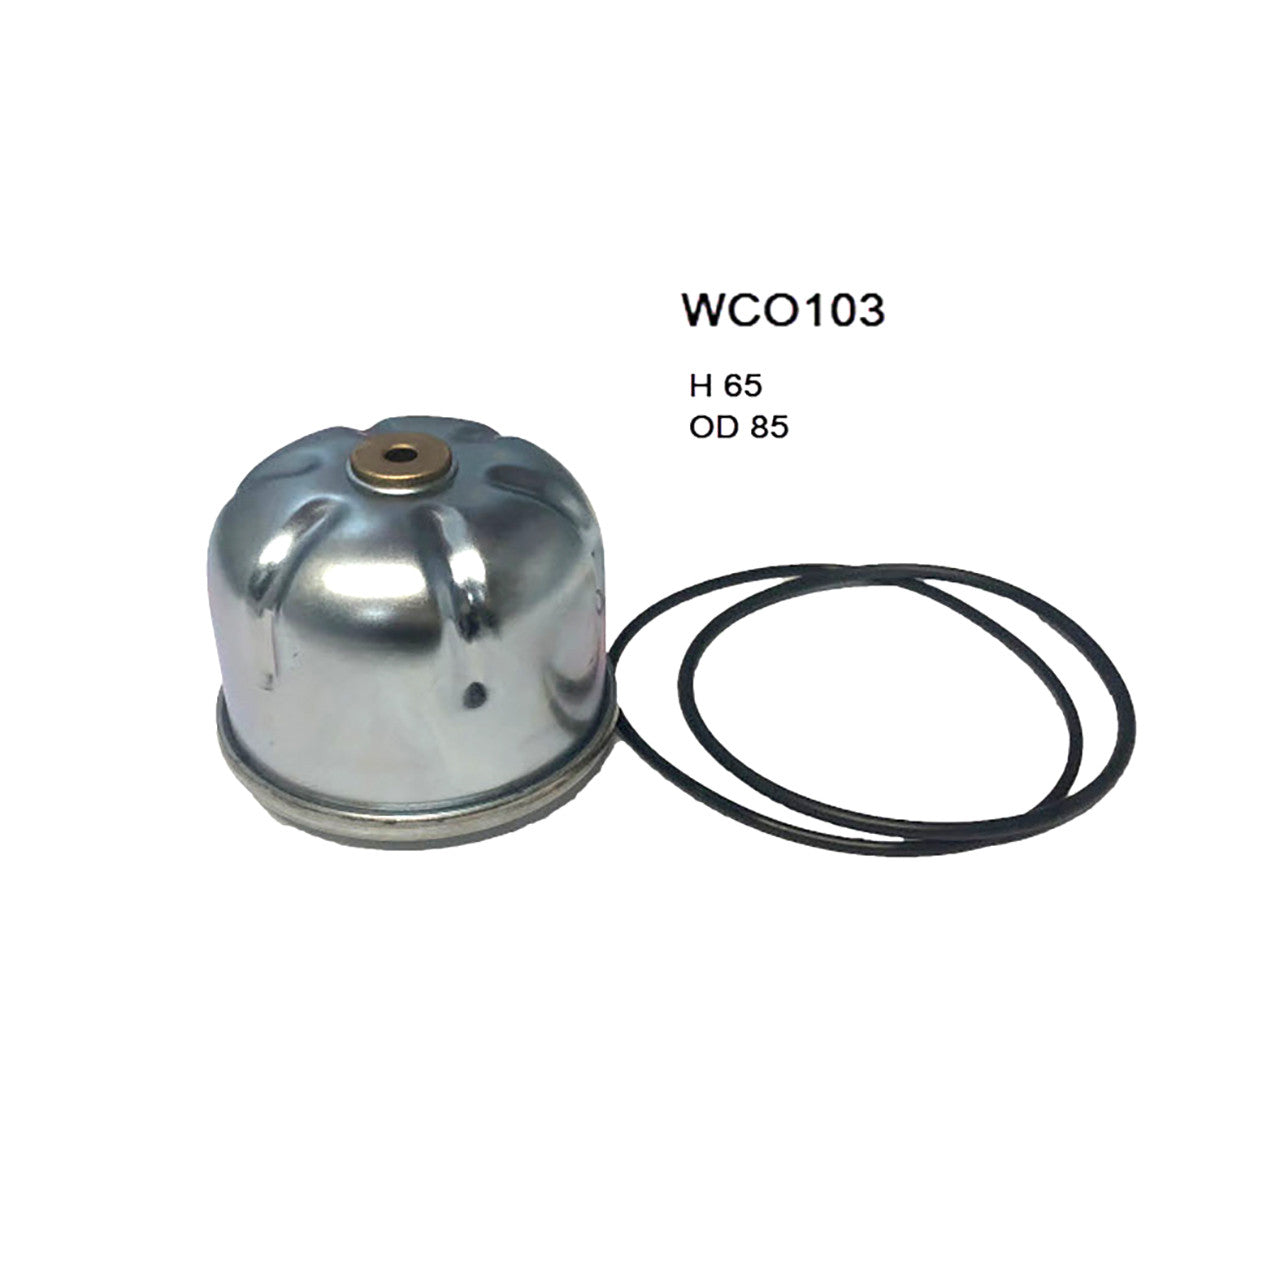 WCO103 Wesfil Cooper Oil Filter for Land Rover Ford (Cross Ref: R2698P)